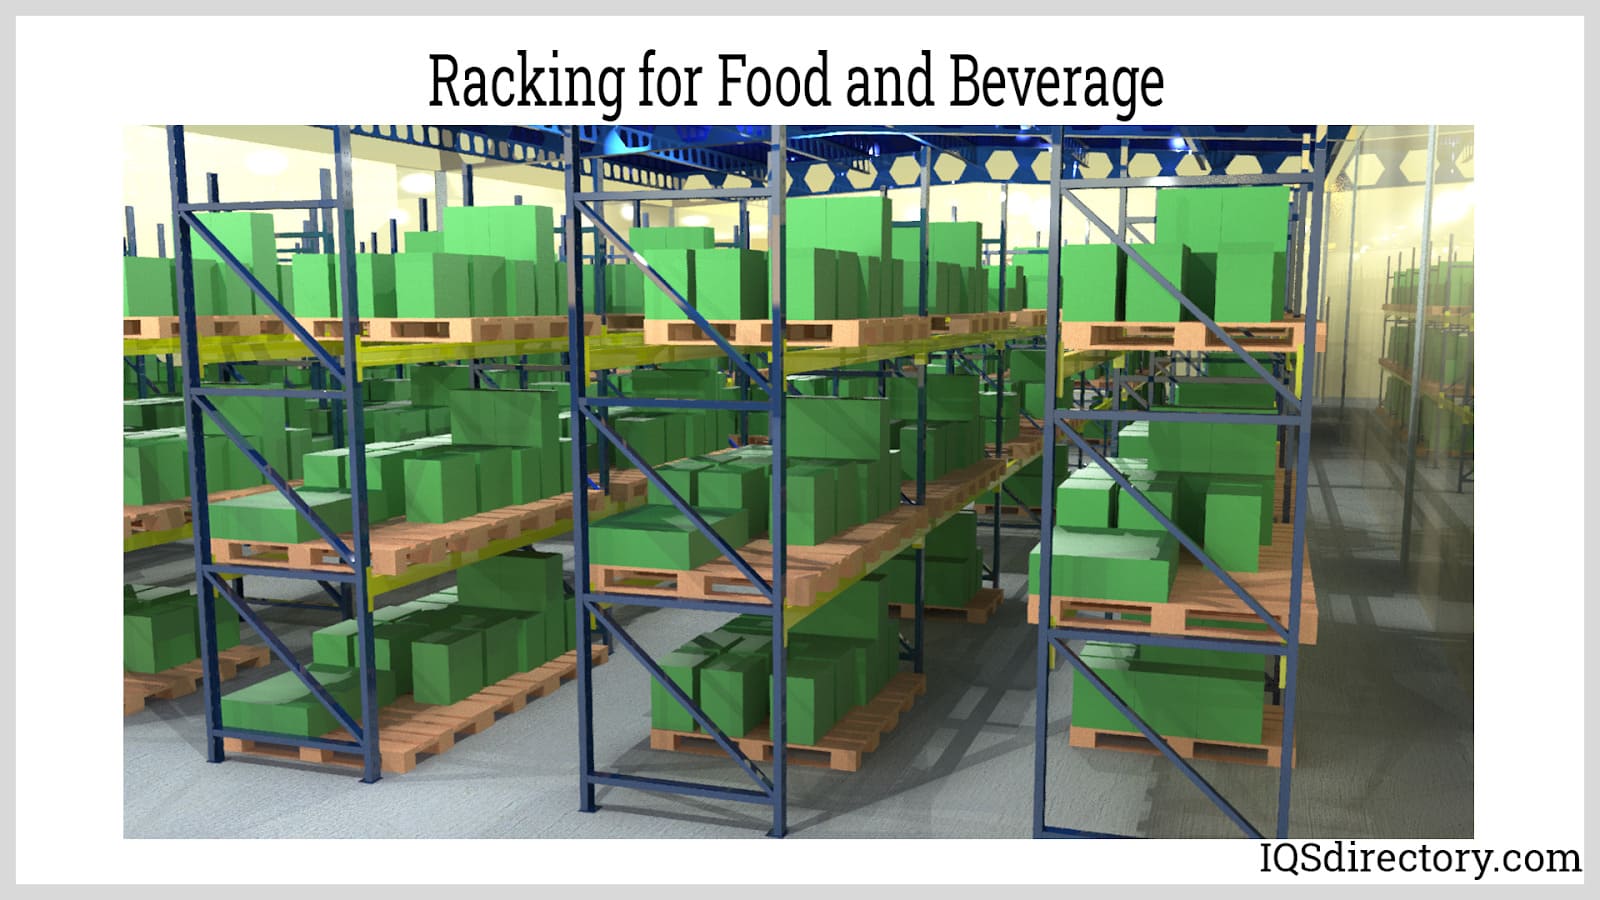 Recognize the Advantages of Multiple Small Warehouses Over One Large One